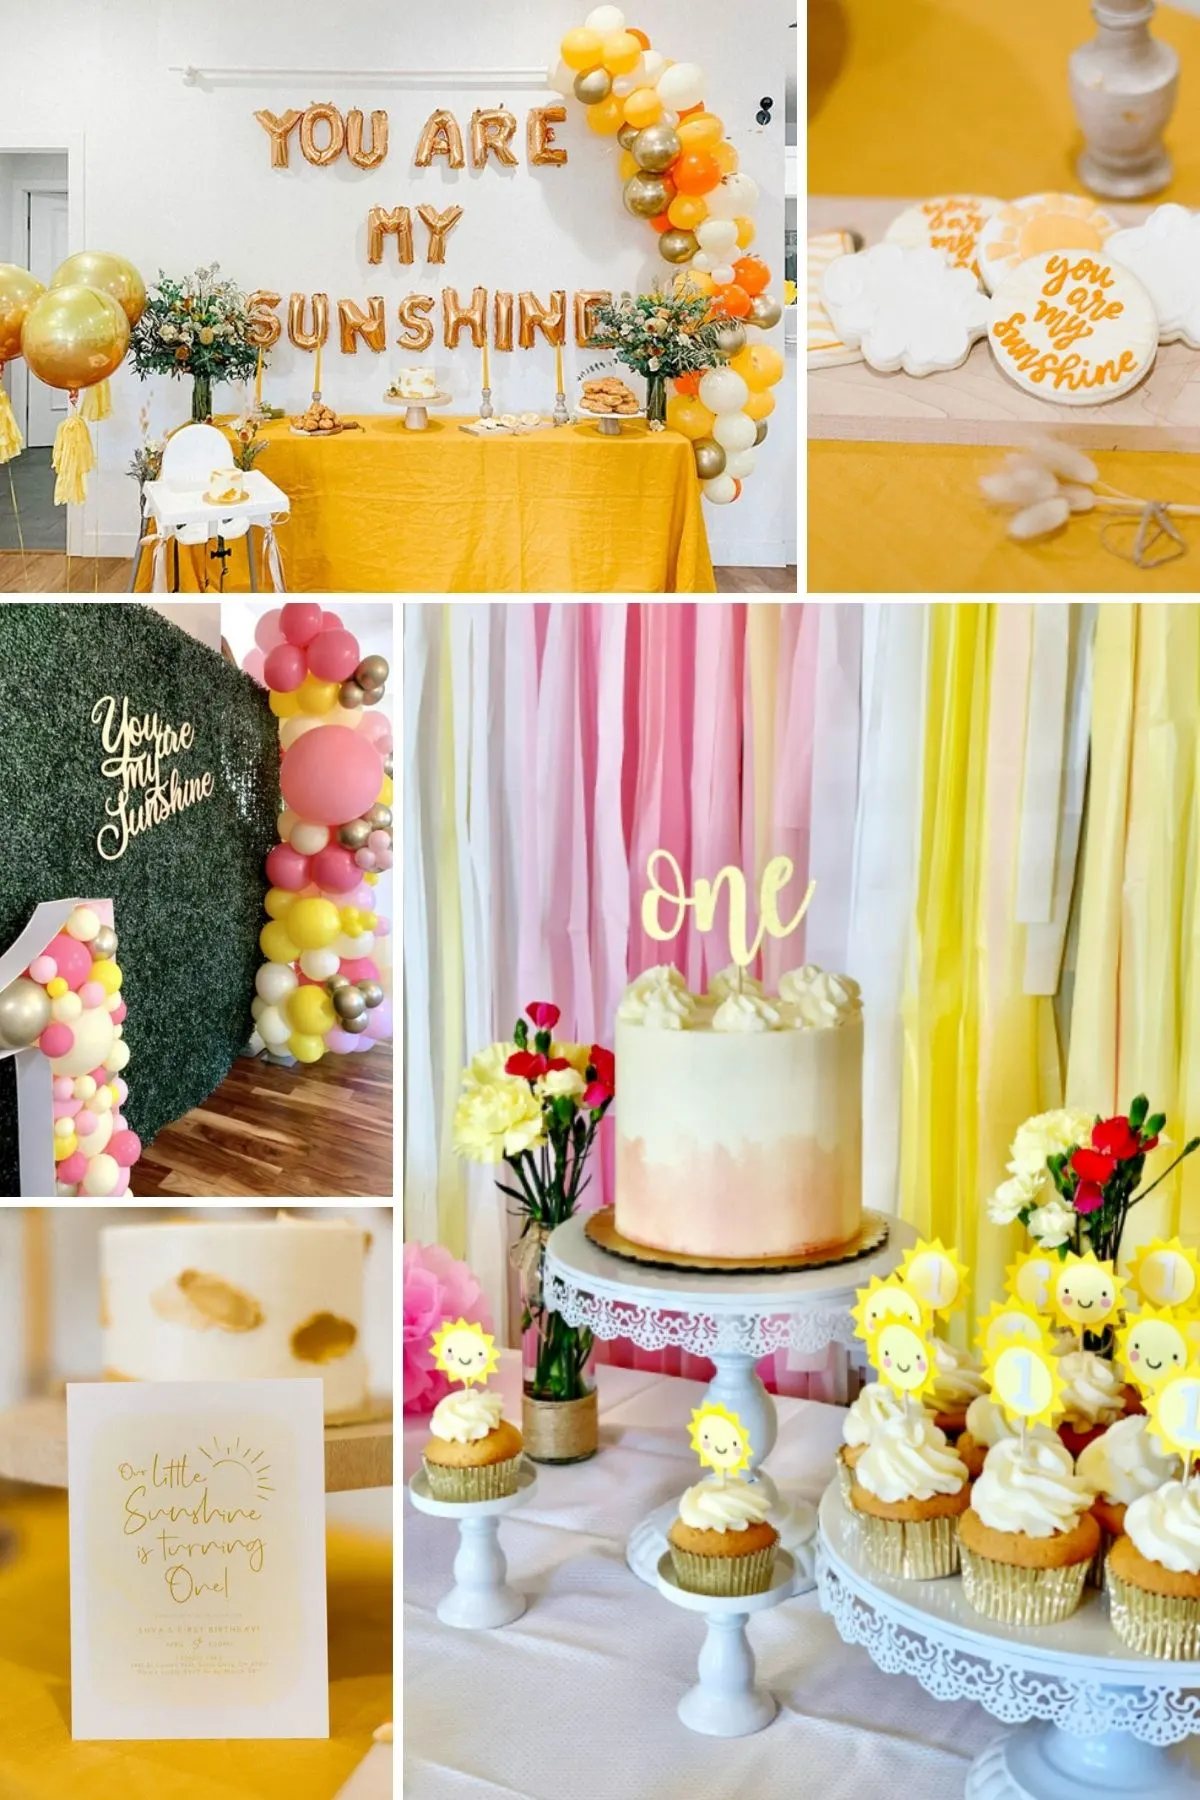 Photo collage for sunshine party theme including cake, cupcakes, and party sign.